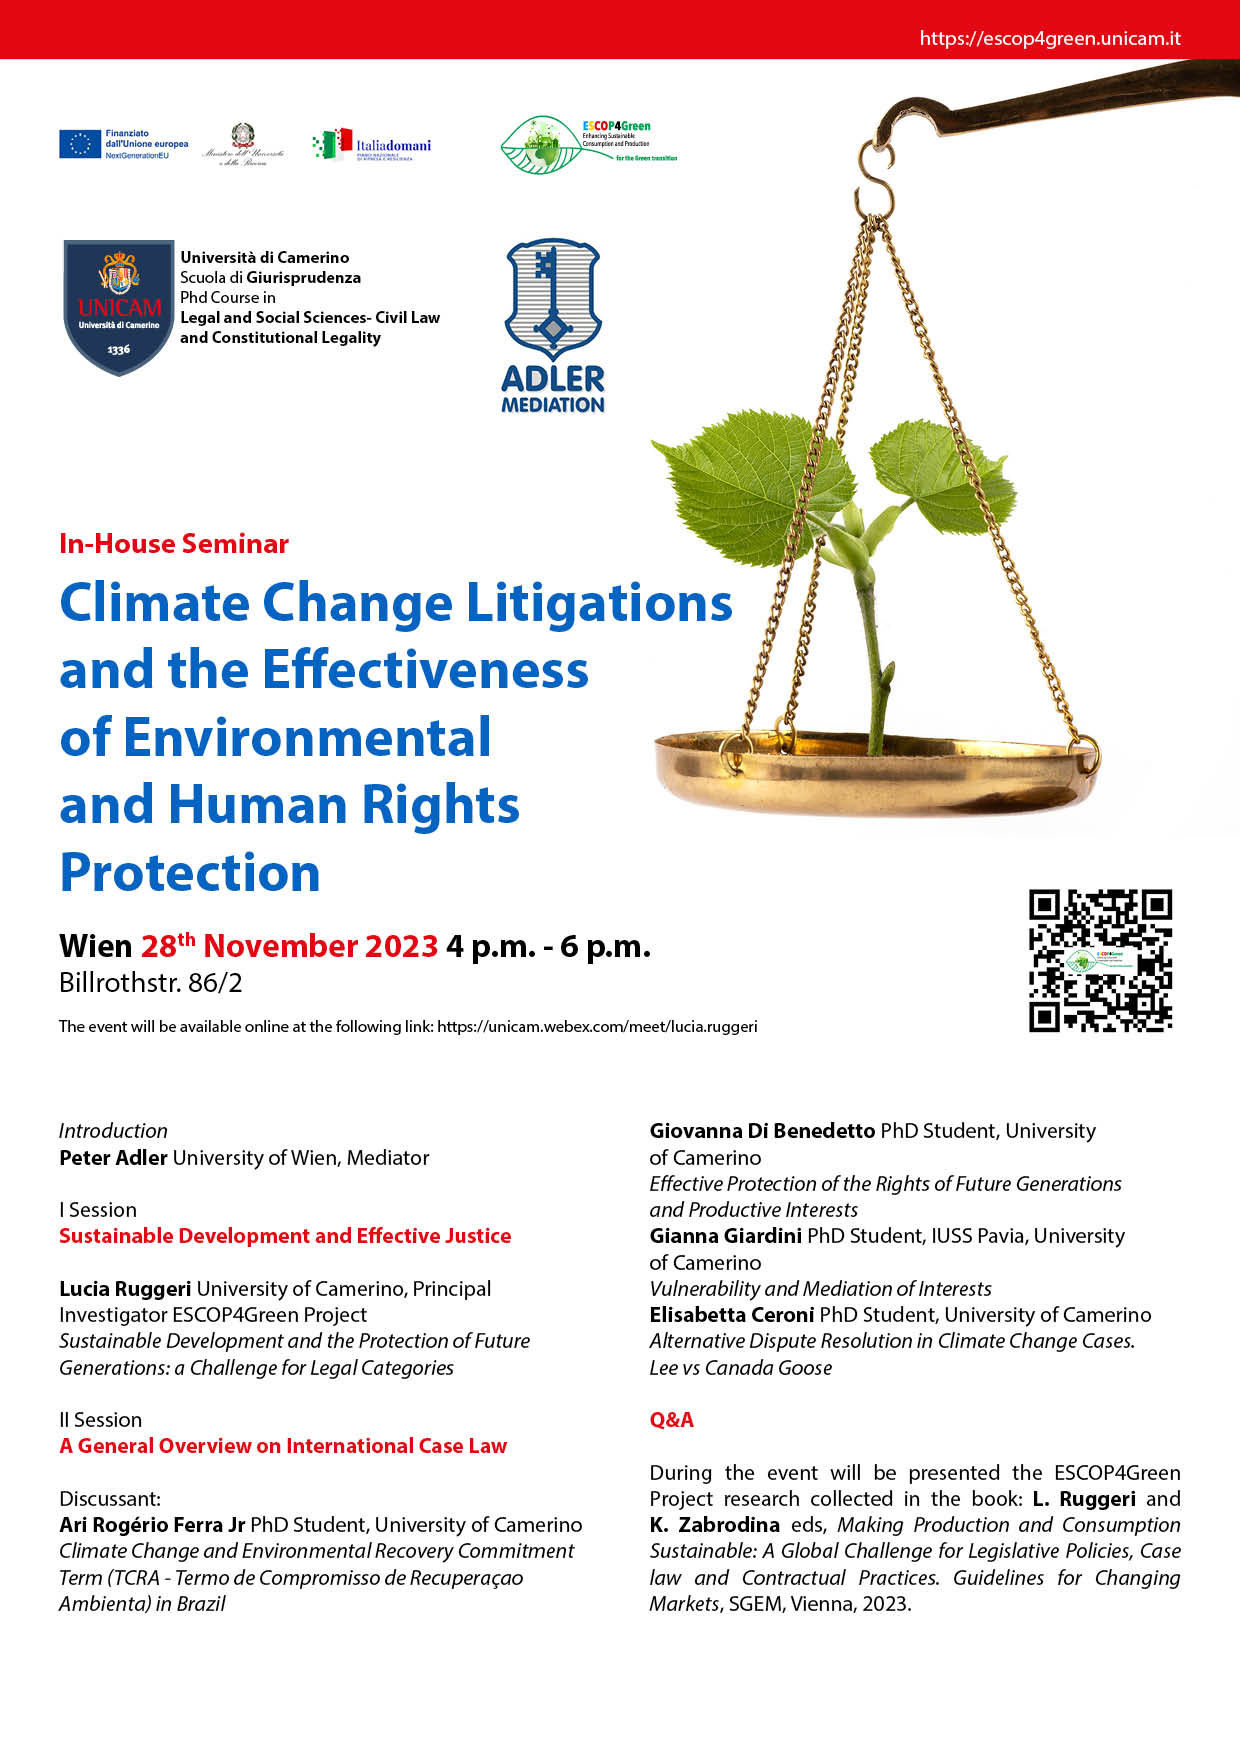 In-House Seminar "Climate Change Litigations and the Effectiveness of Environmental and Human Rights Protection"